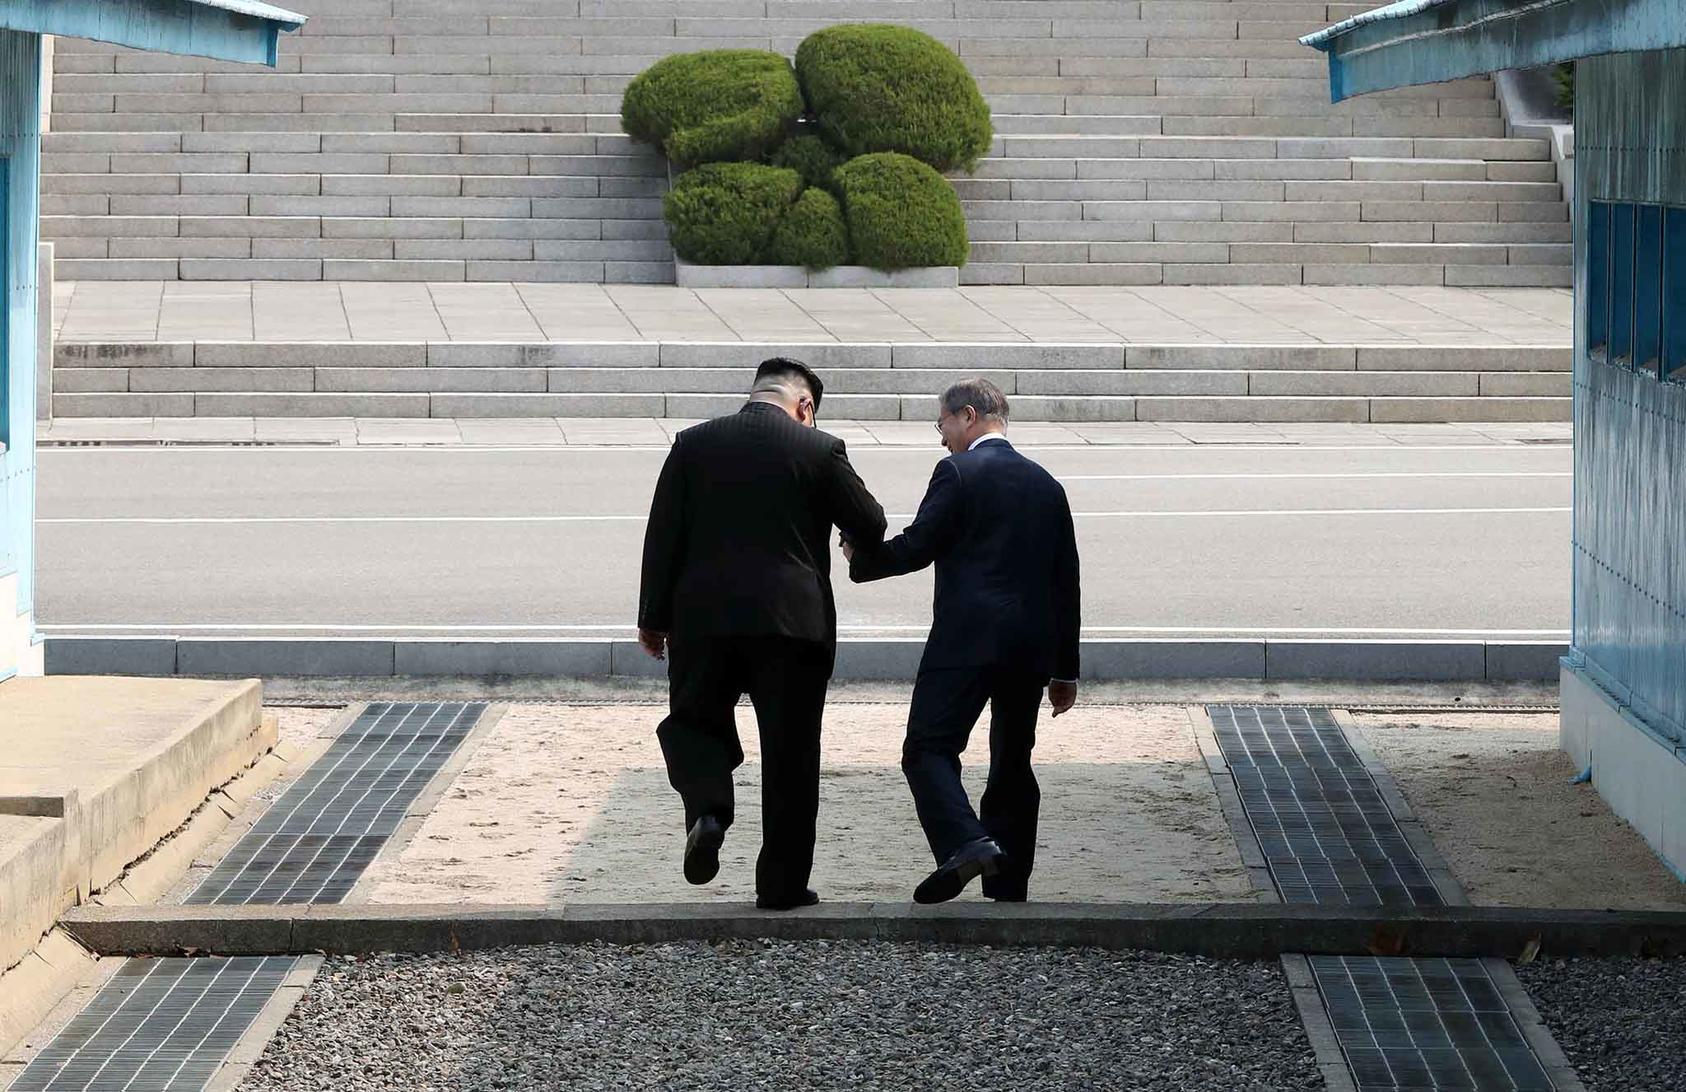 North Korean leader Kim Jong-un, left, holds South Korean President Moon Jae-in's hand as they step over the border demarcation line onto North Korean territory, in the border village of Panmunjom.  (Korea Summit Press Pool via The New York Times)